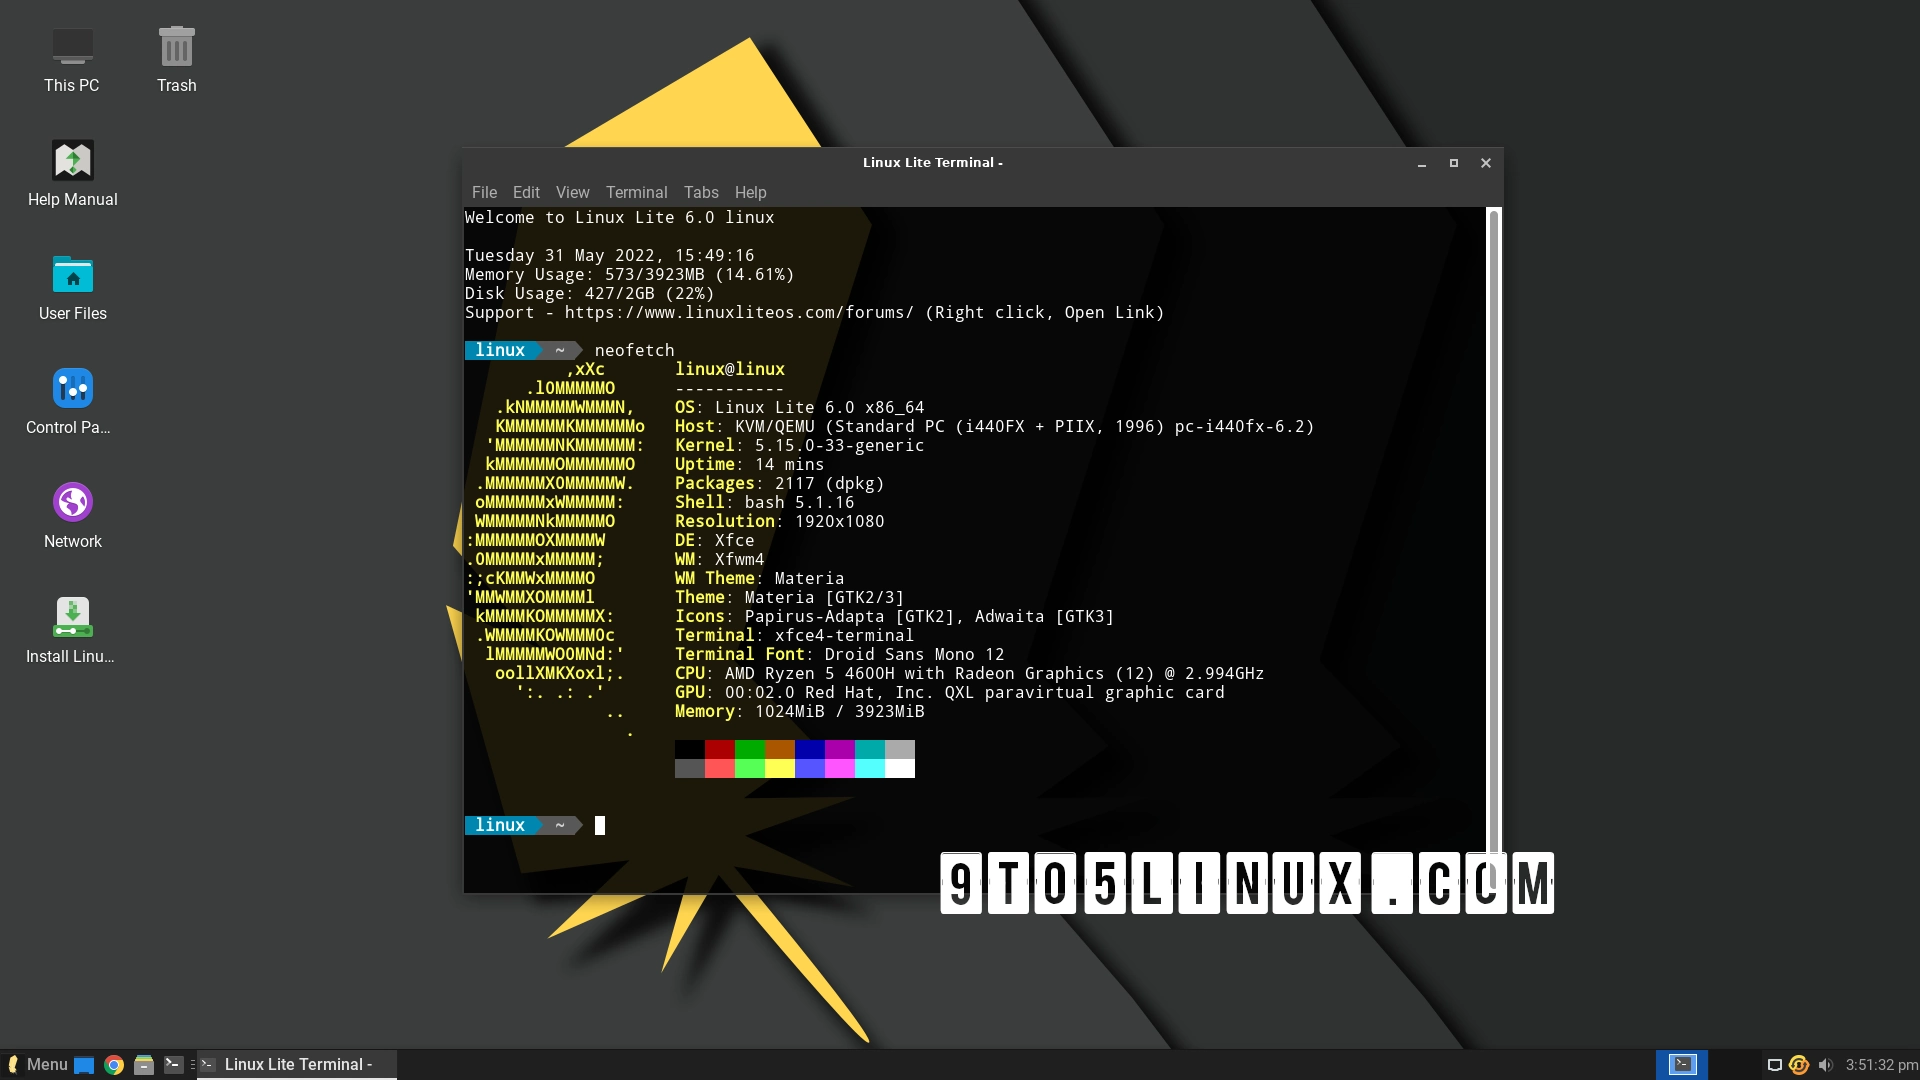 Linux Lite 6.0 Is Finally Here with the Xfce 4.16 Desktop, Based on Ubuntu 22.04 LTS